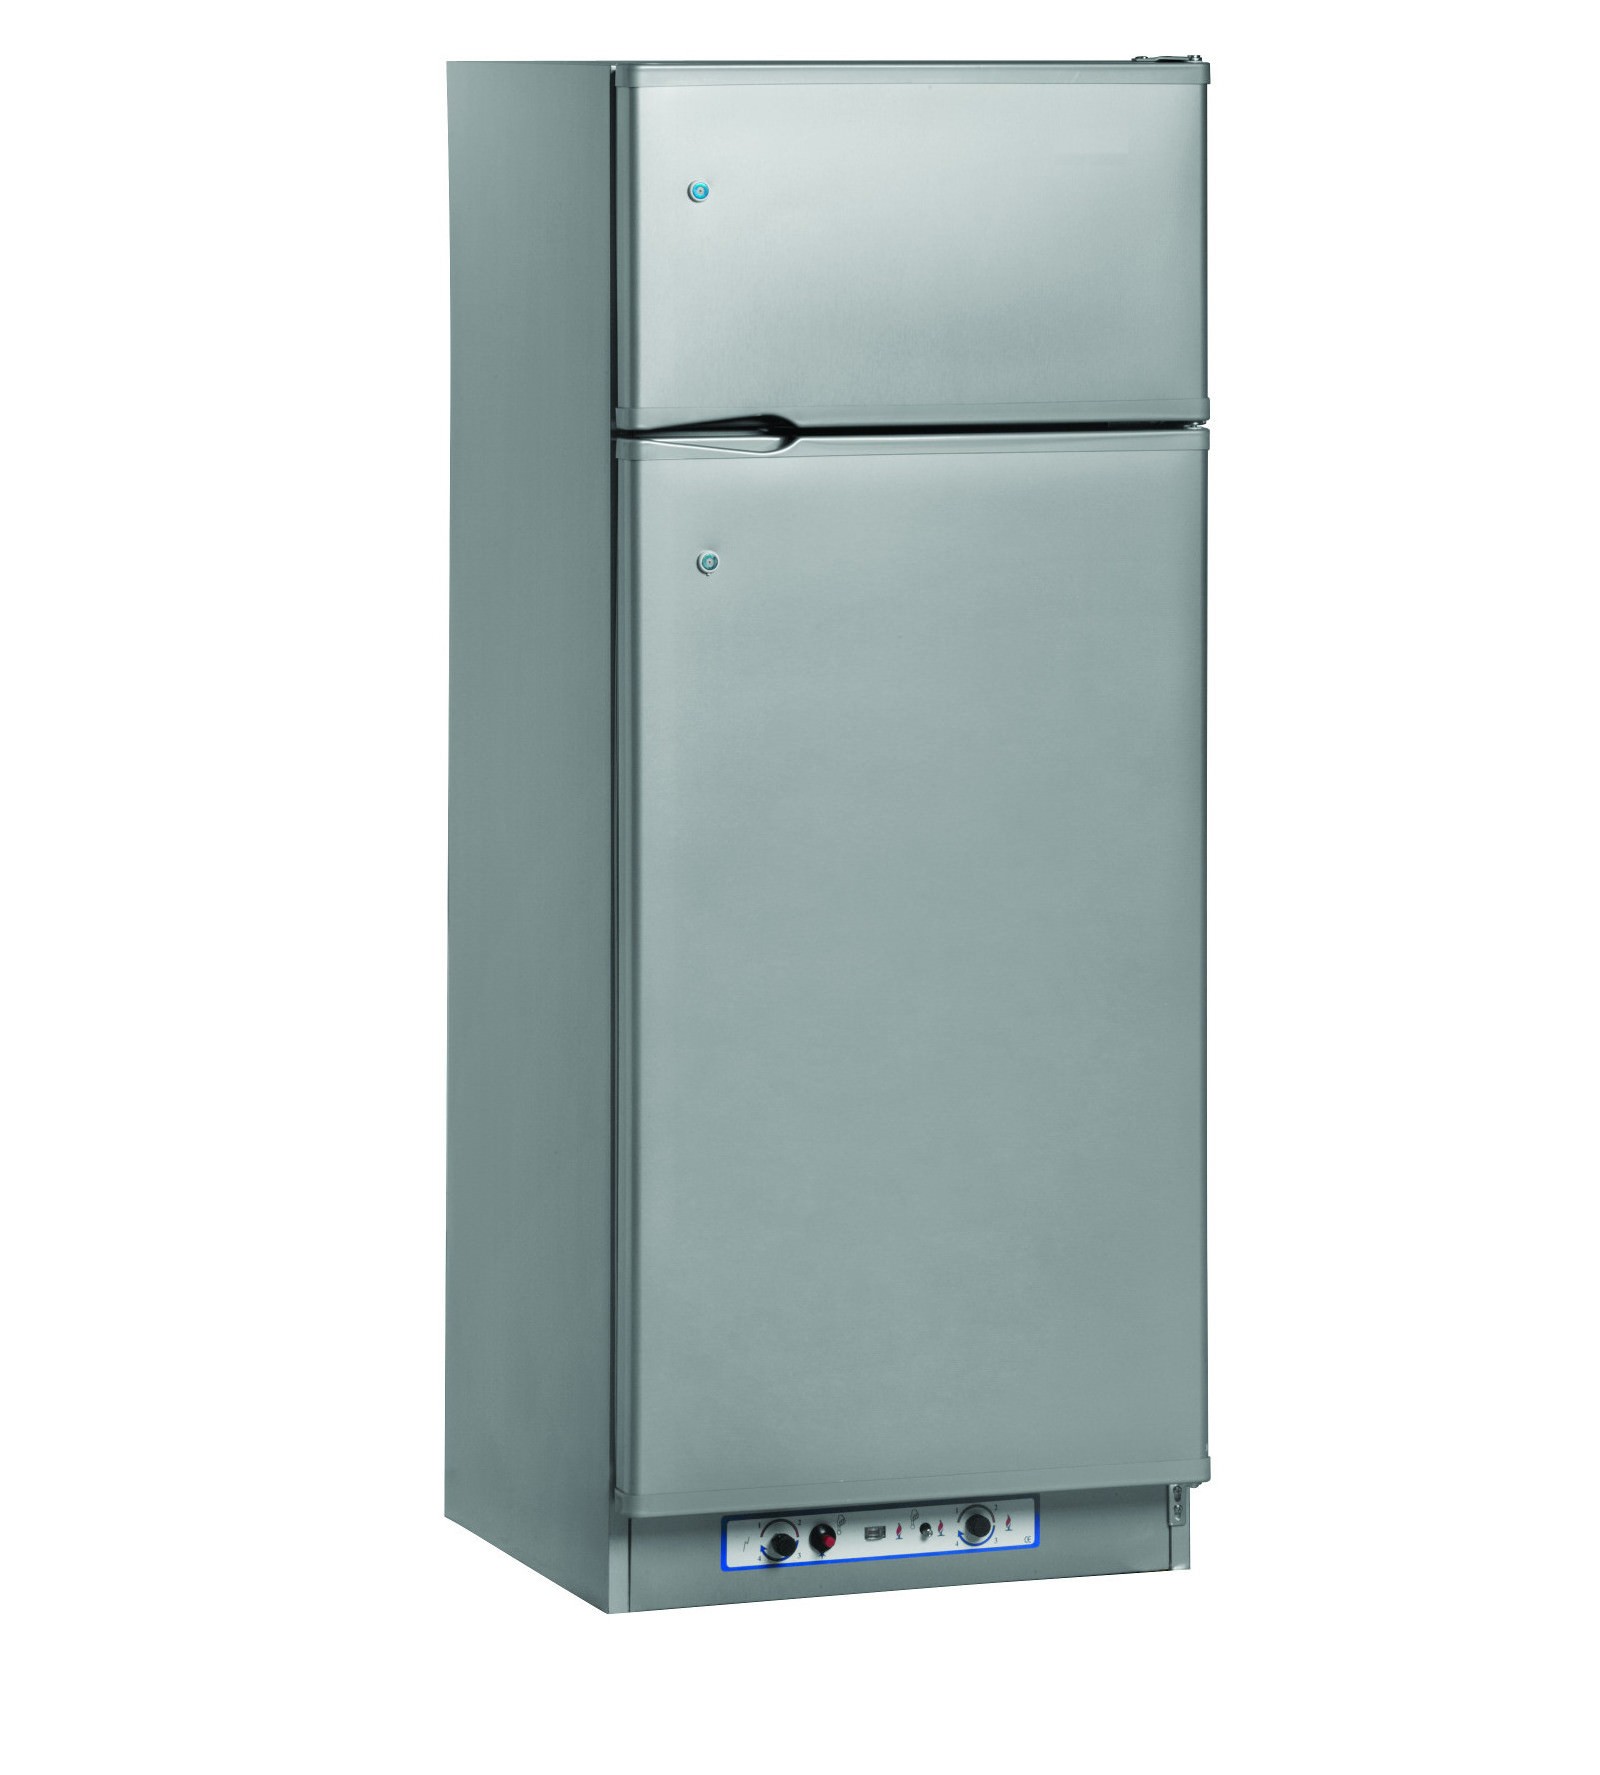 Rhino GR265D Gas/Electric/Paraffin Cooler & Freezer Combo